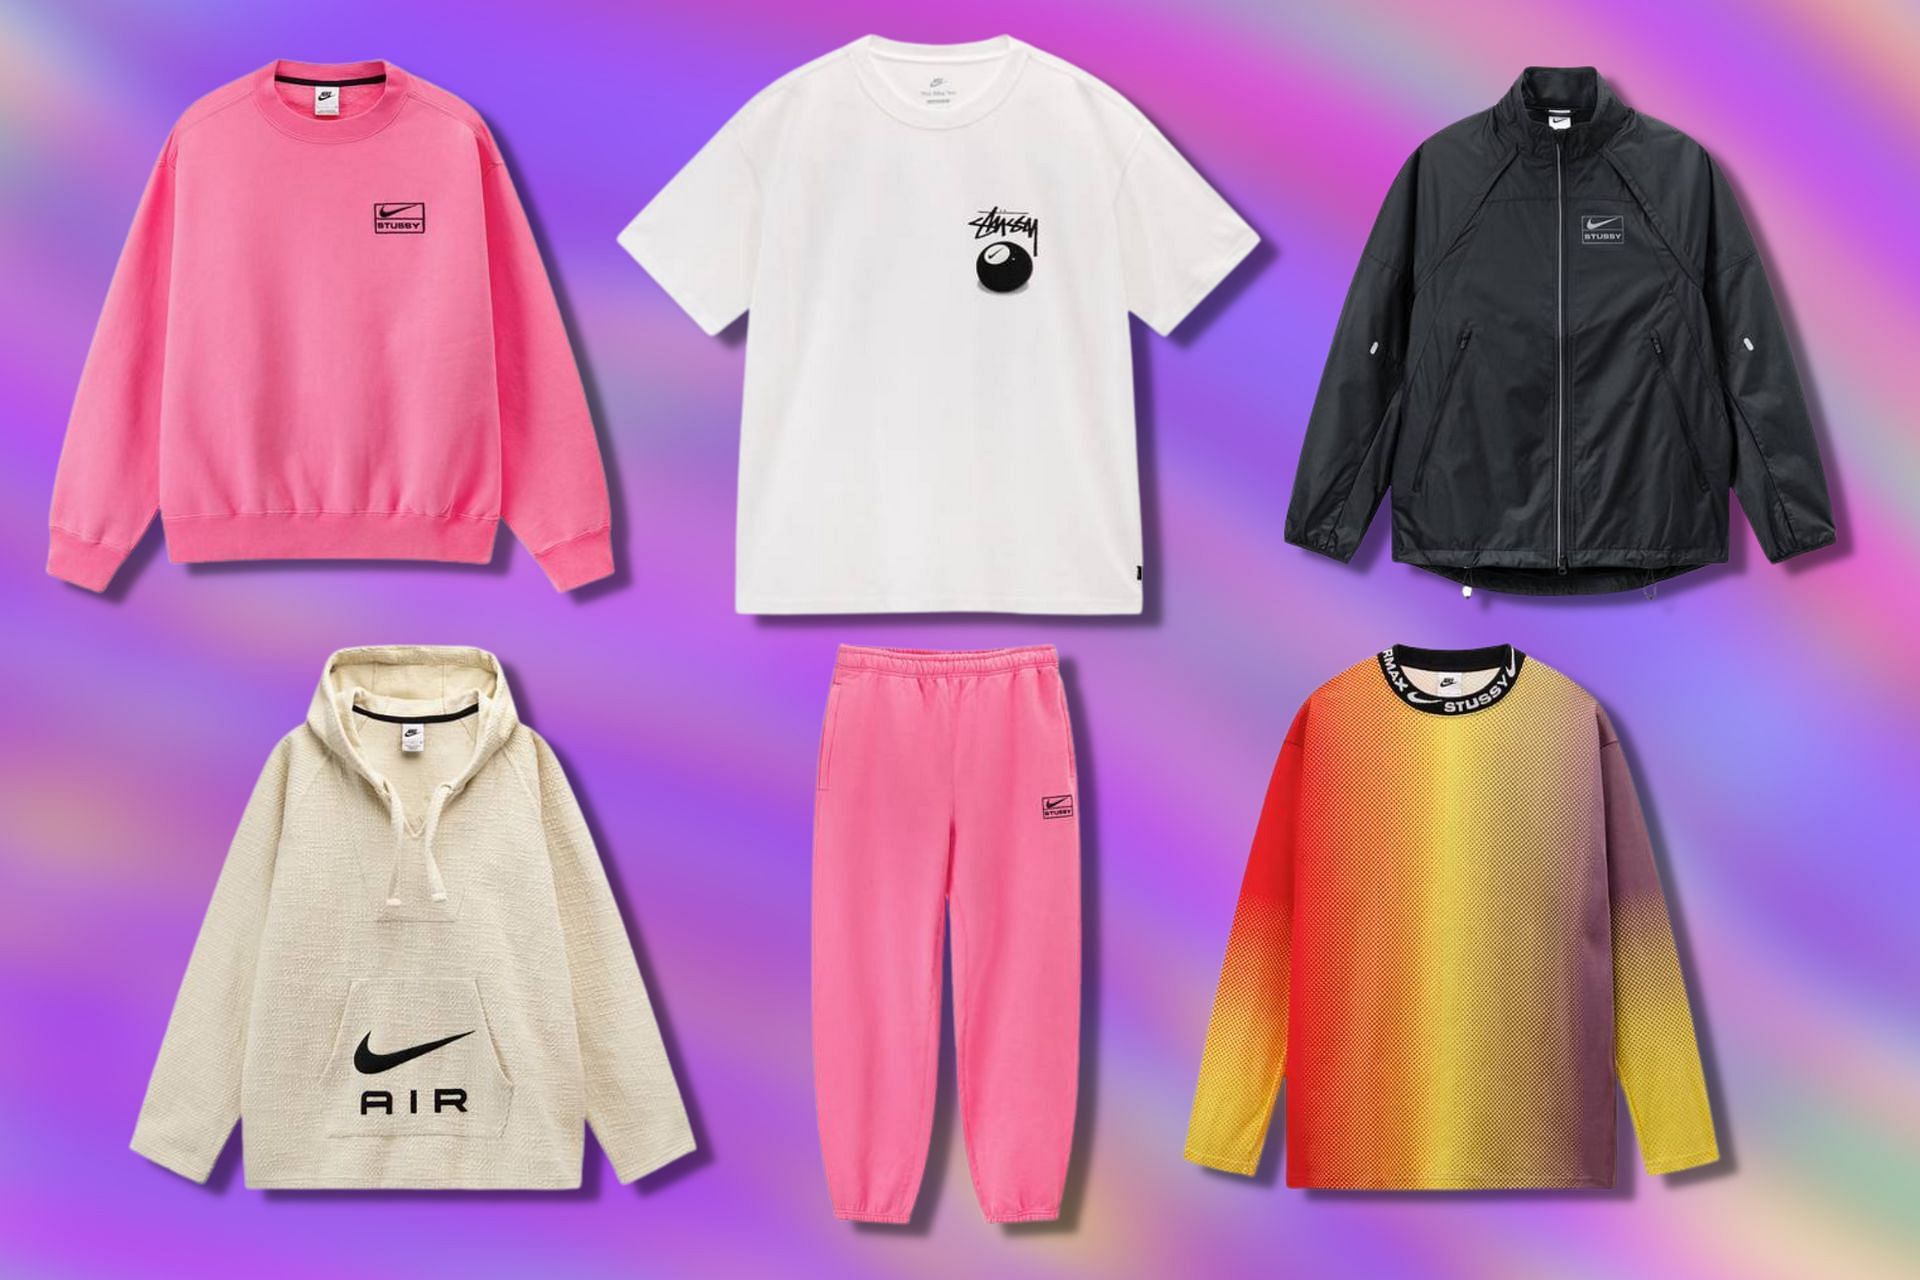 Take a look at the items offered in the collaborative apparel capsule (Image via Sportskeeda)